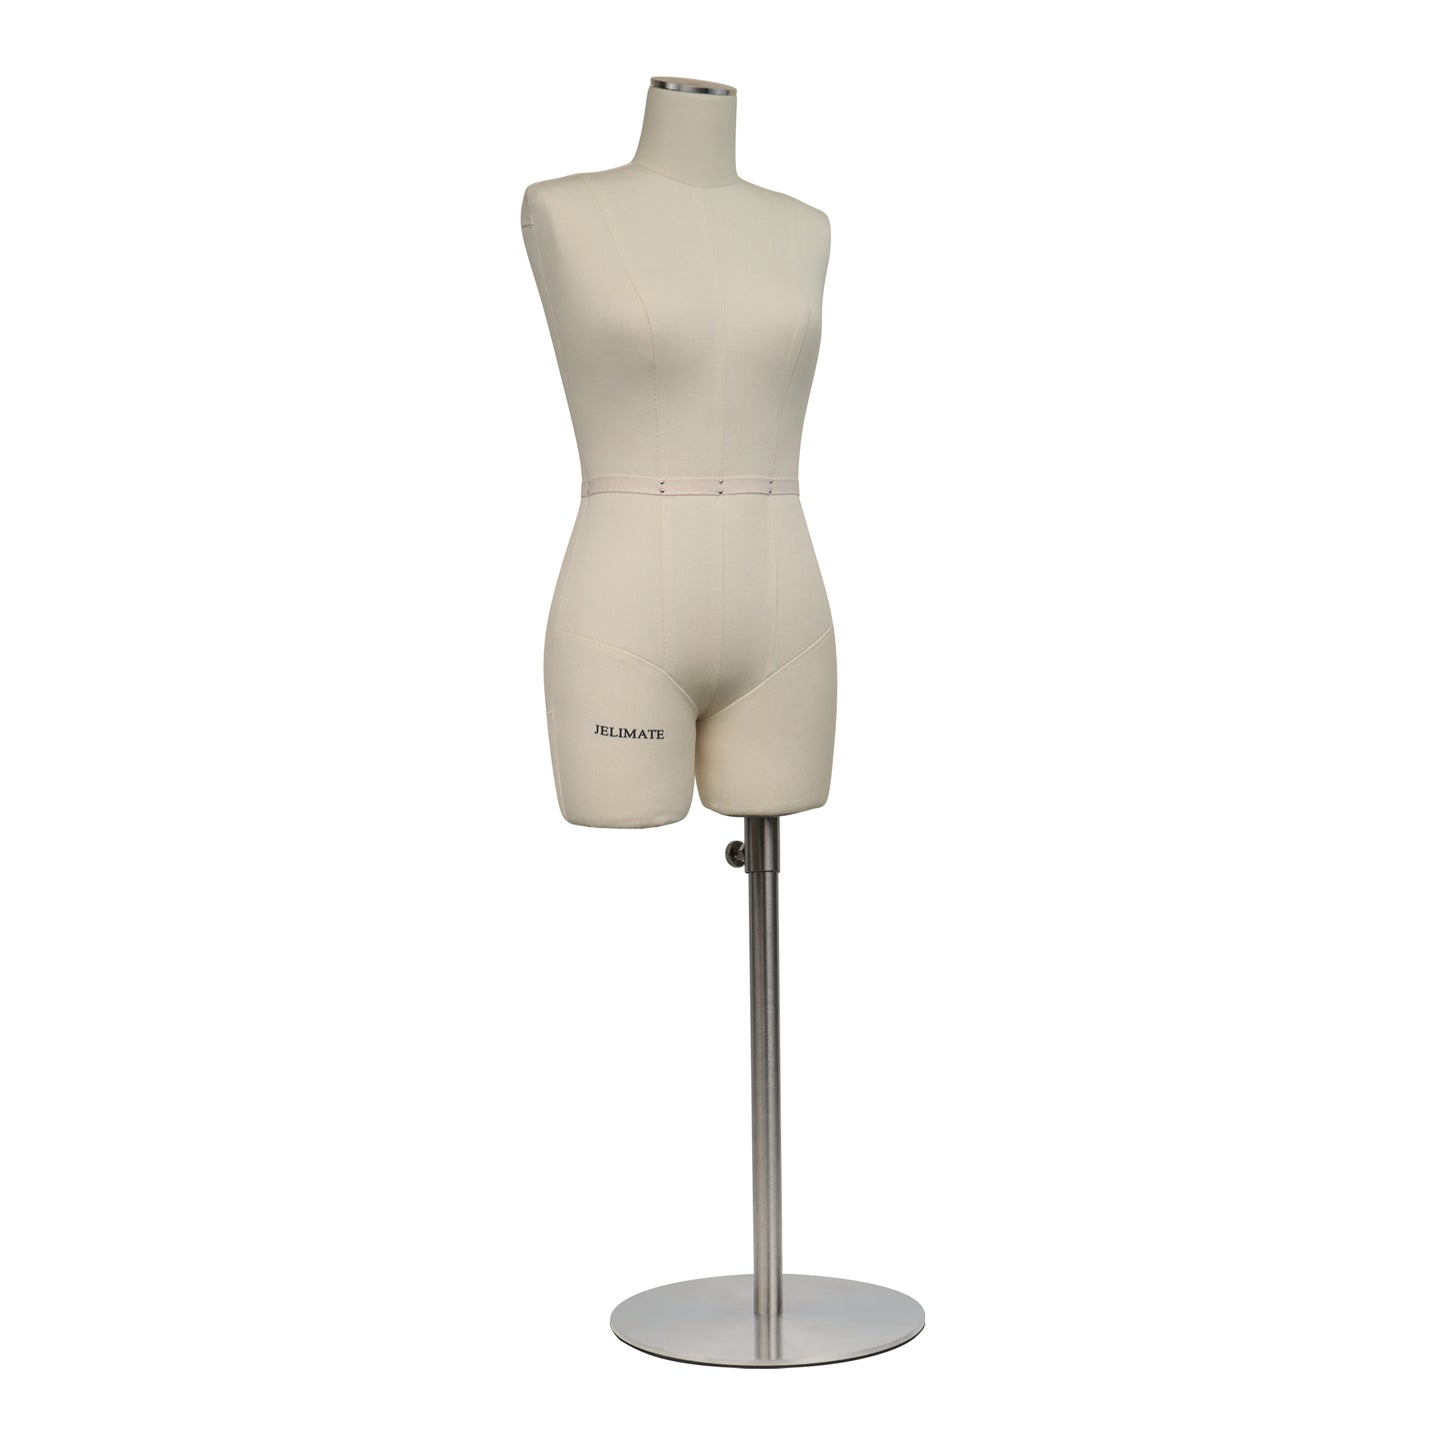 JMSIZE12 Half Scale Female Dress Form For Pattern Making,1/2 Scale Miniature Sewing Mannequin for Women,Mini Tailor Mannequin for Fashion Designer Fashion School Draping Mannequin